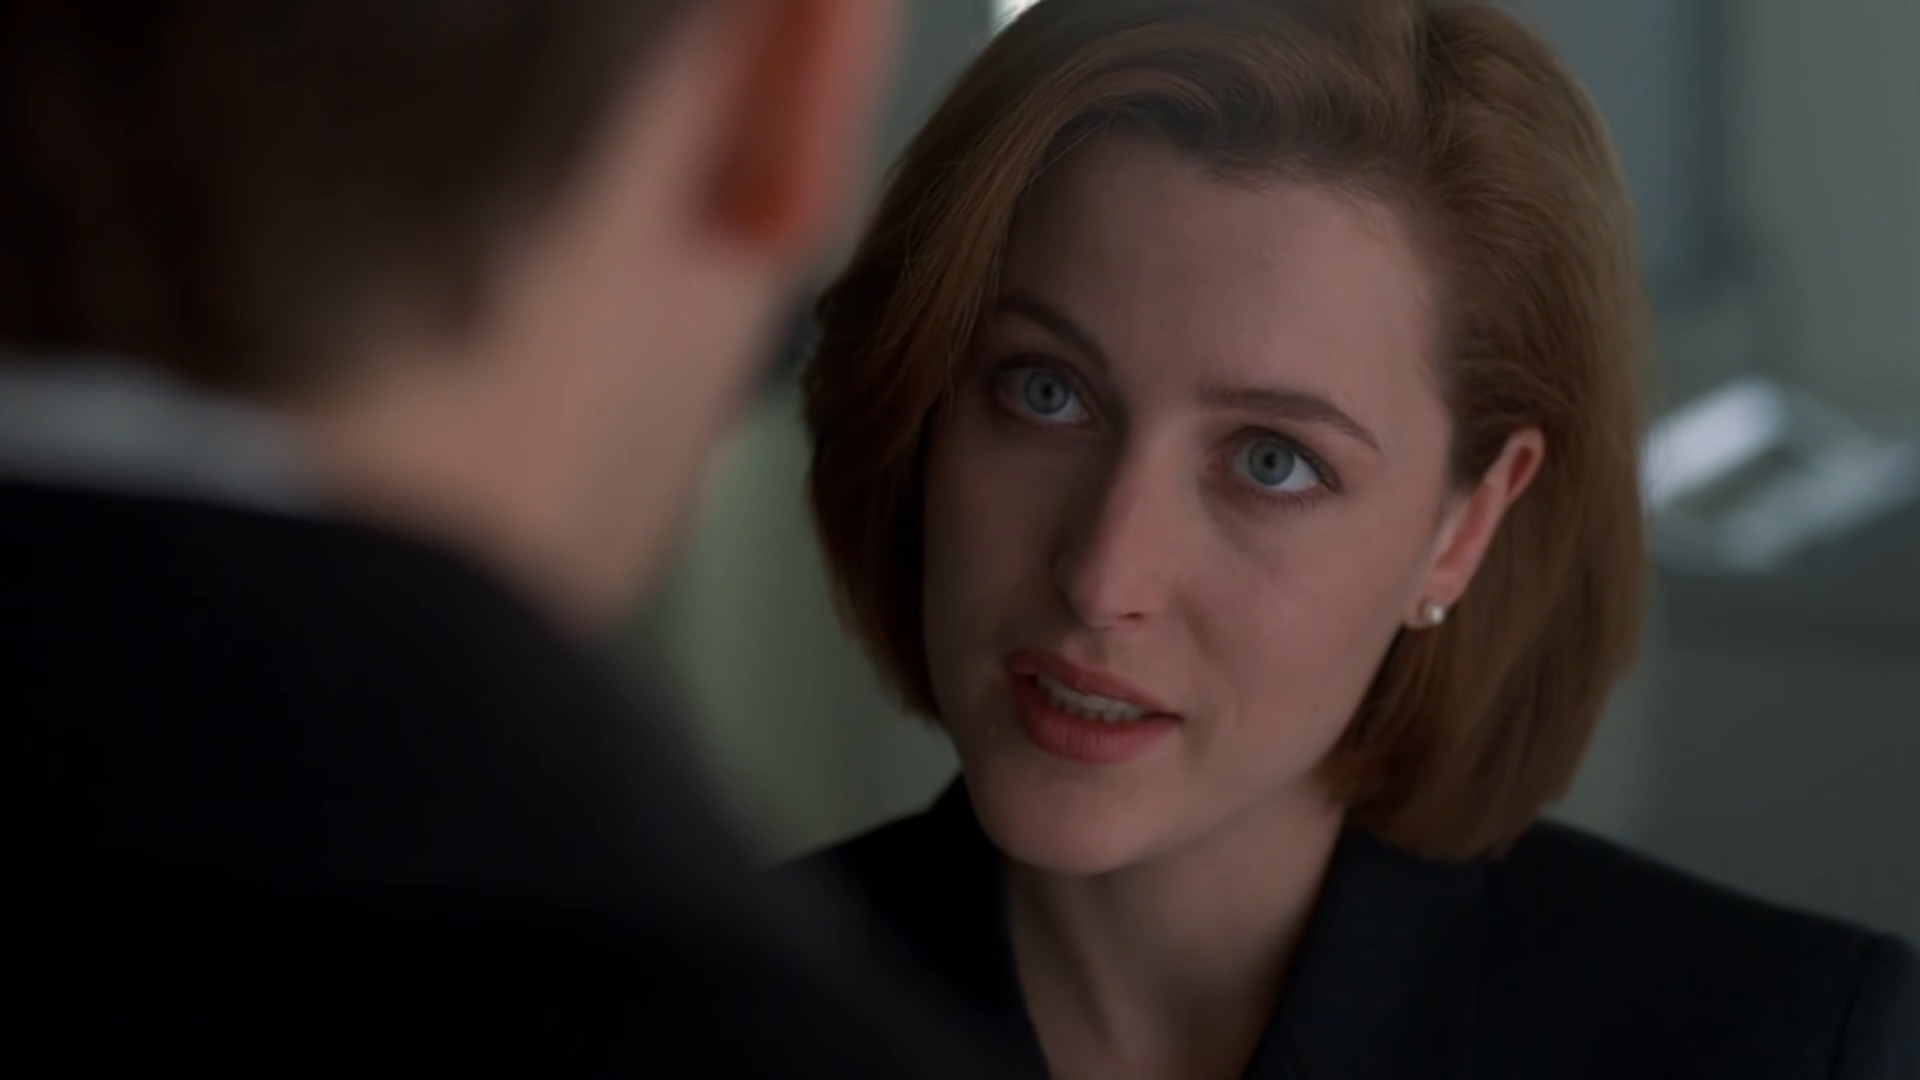 Agent Scully (Gillian Anderson) tries to get through to Agent Mulder (David Duchovny) in The X-Files Season 4 Episode 14 "Memento Mori" (1997), 20th Century Studios